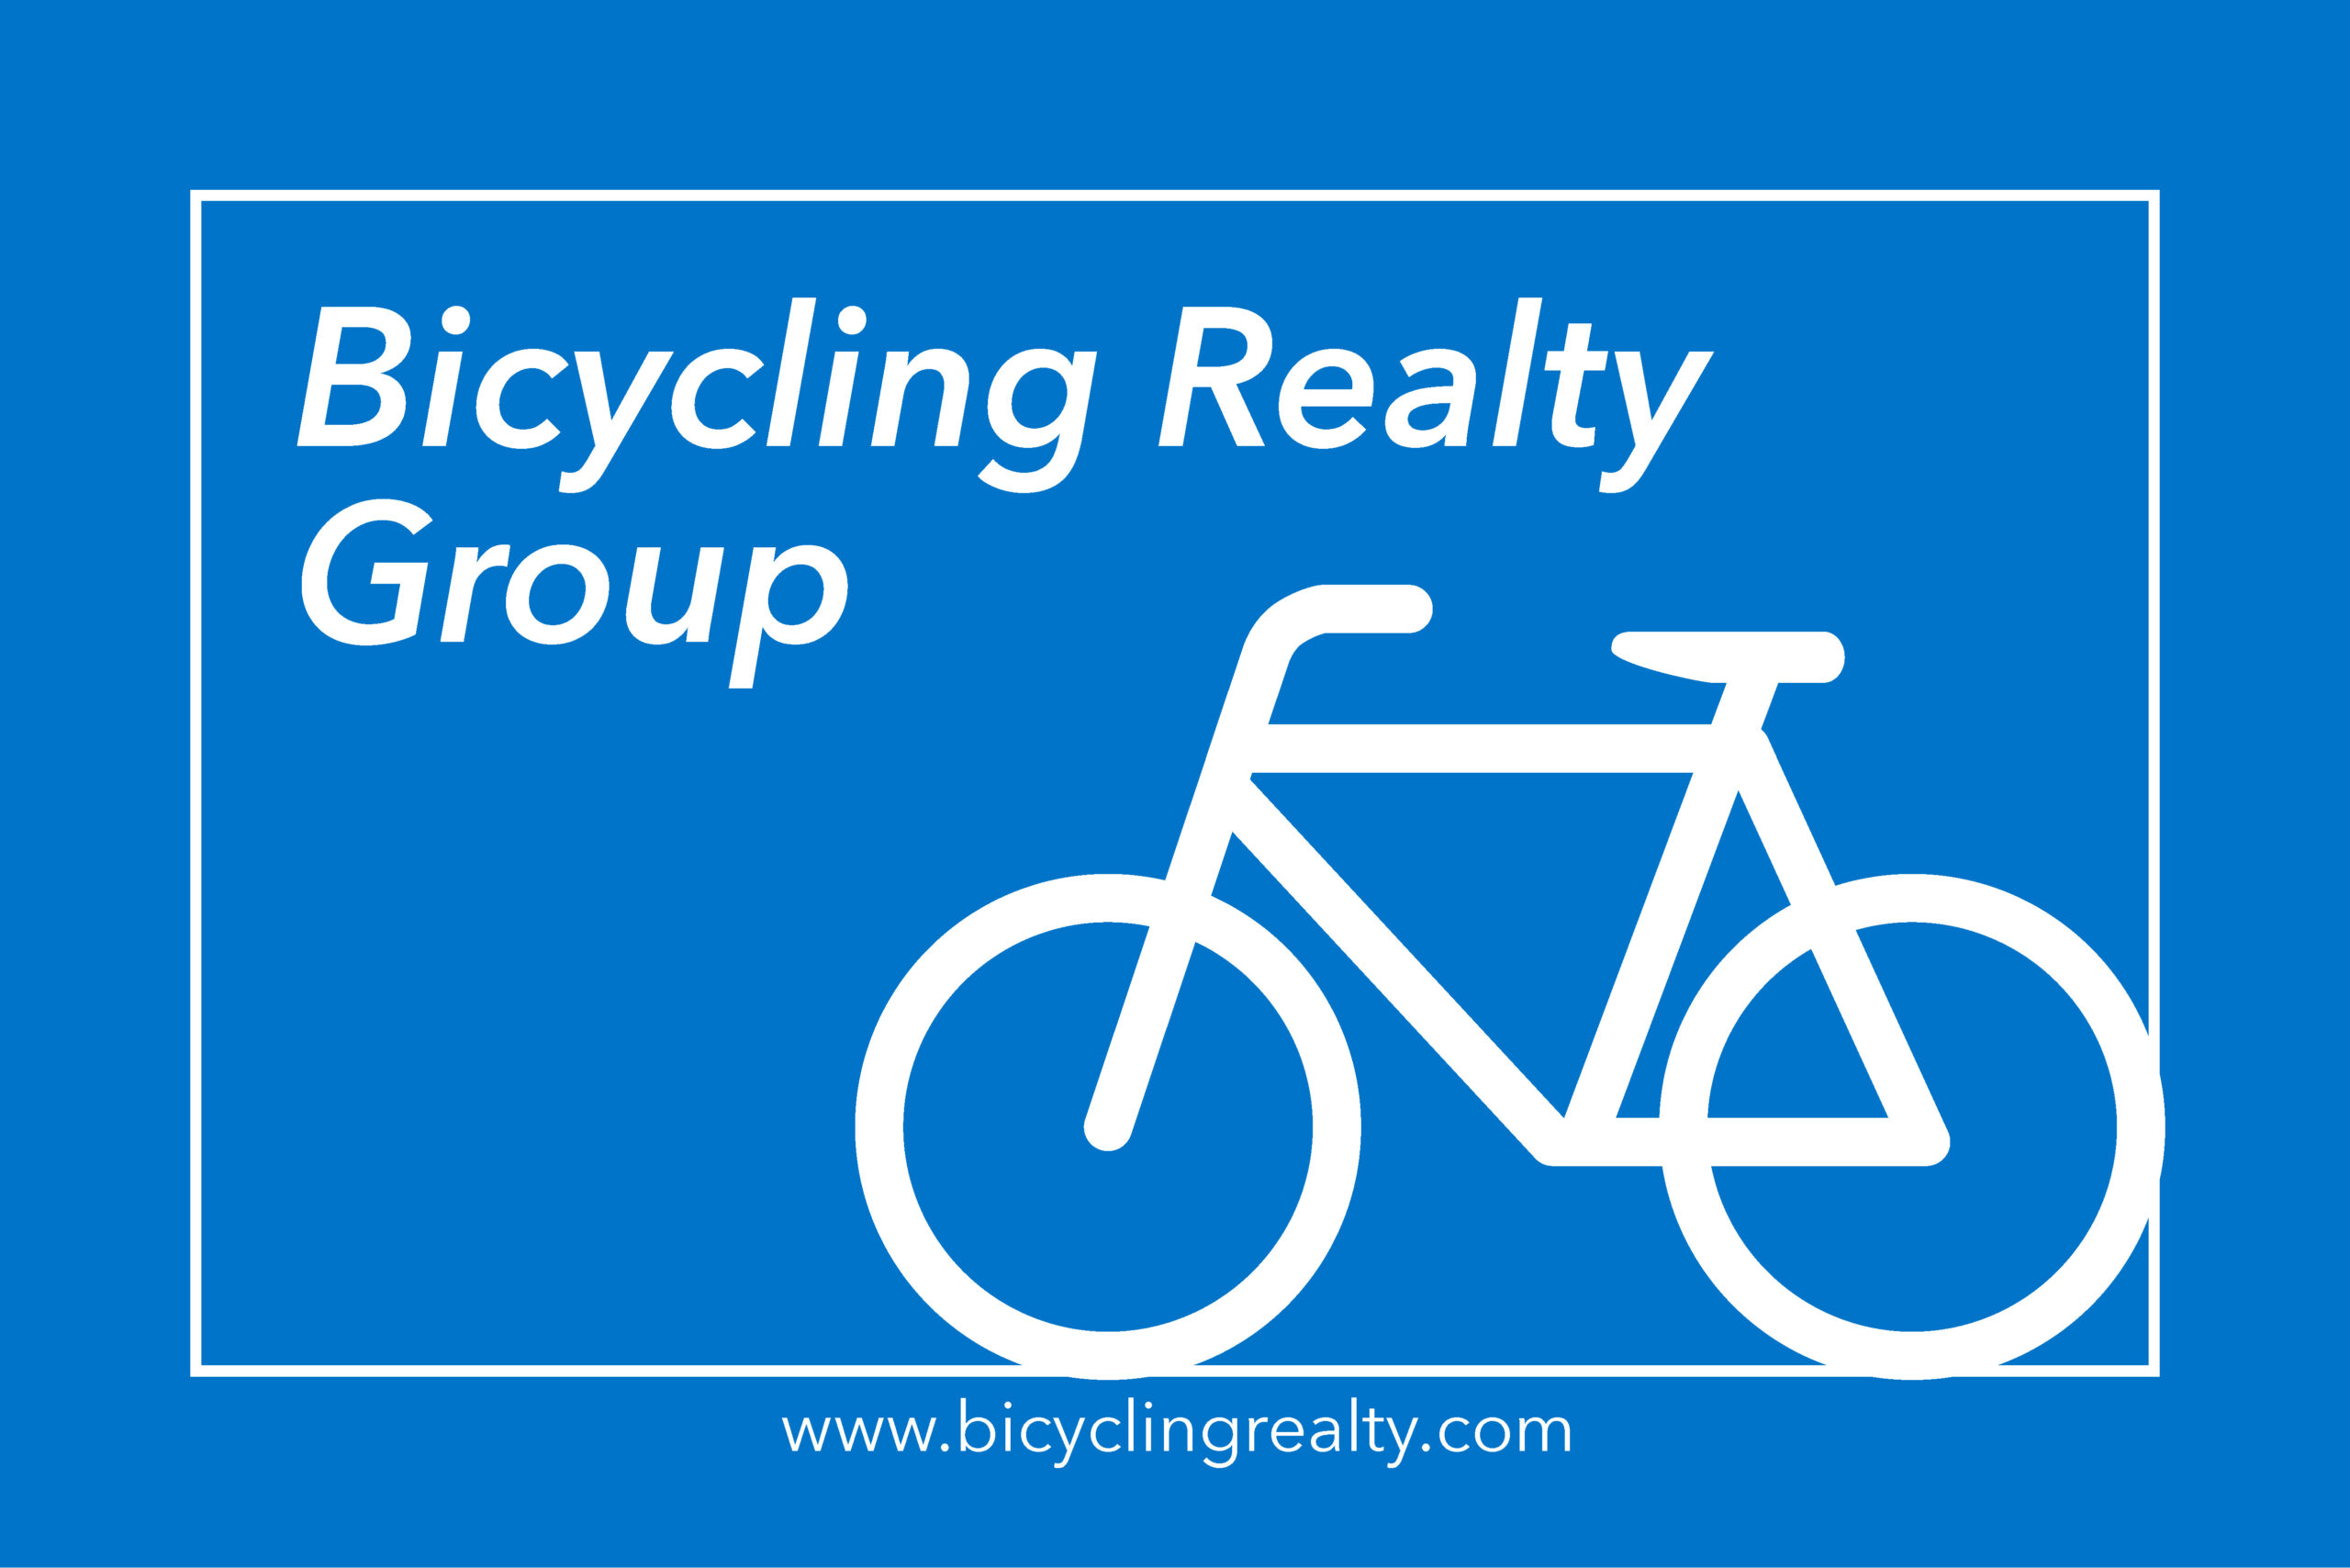 Bicycling Realty Group